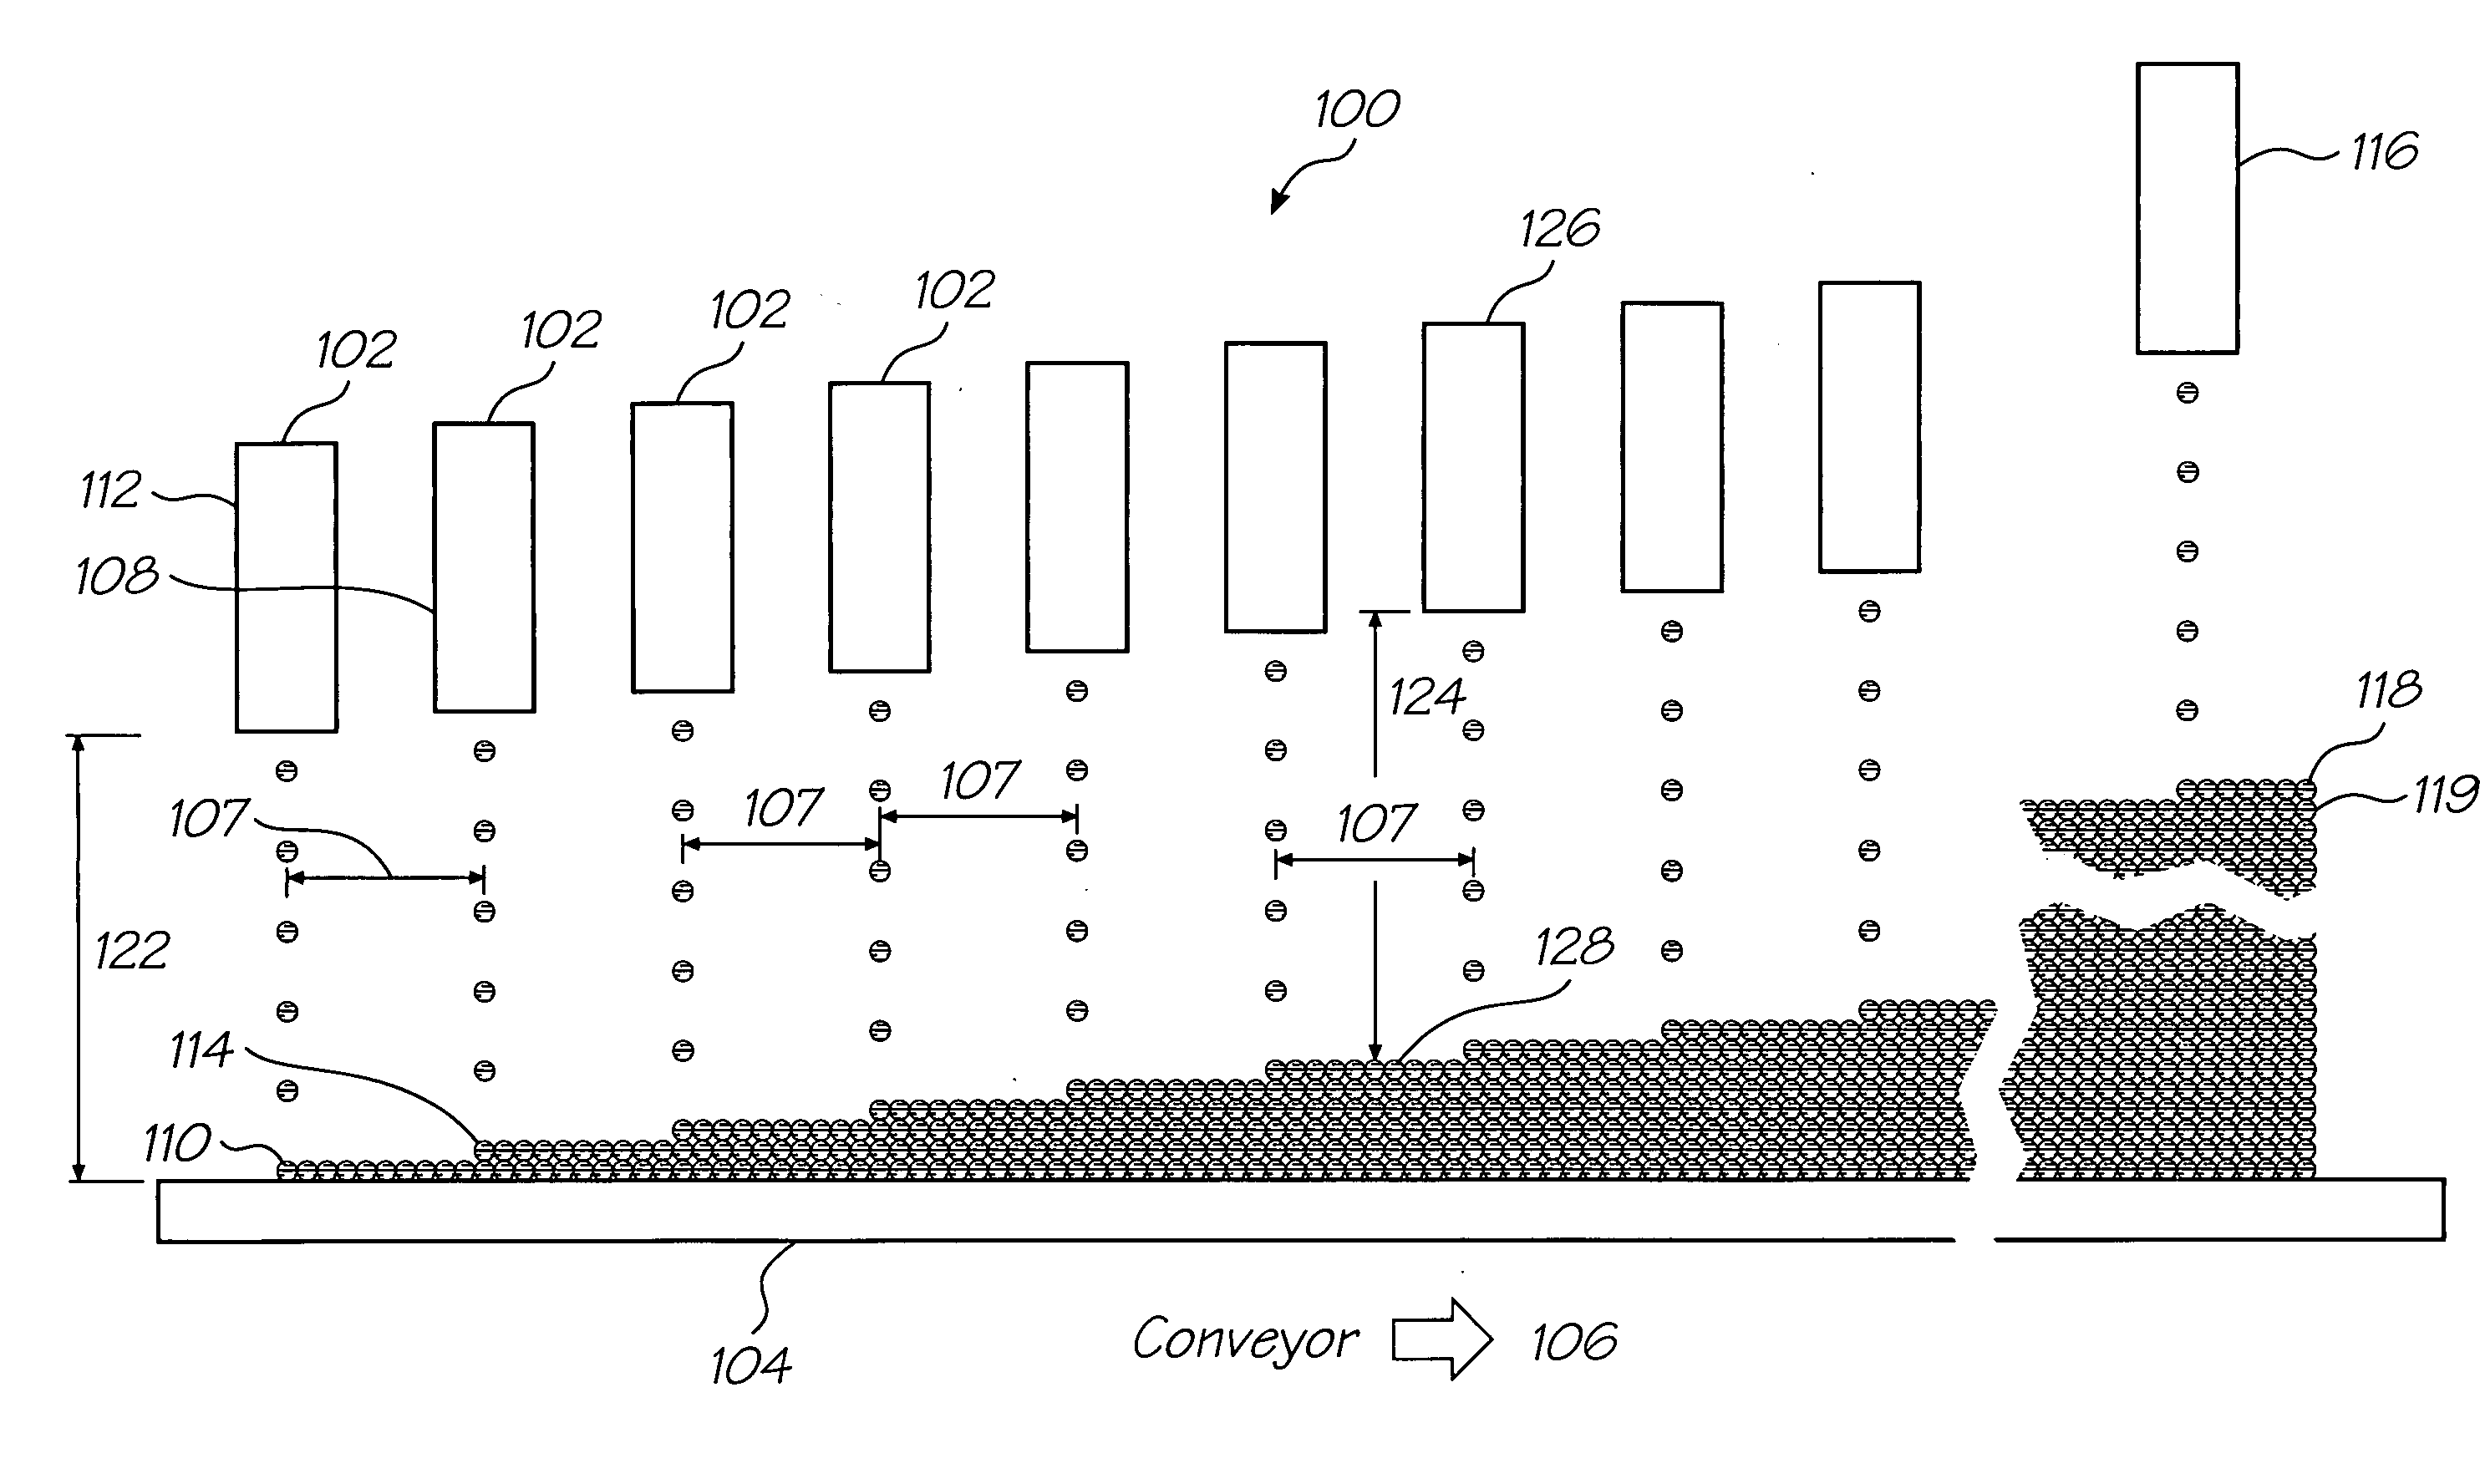 Method for creating a 3-d object